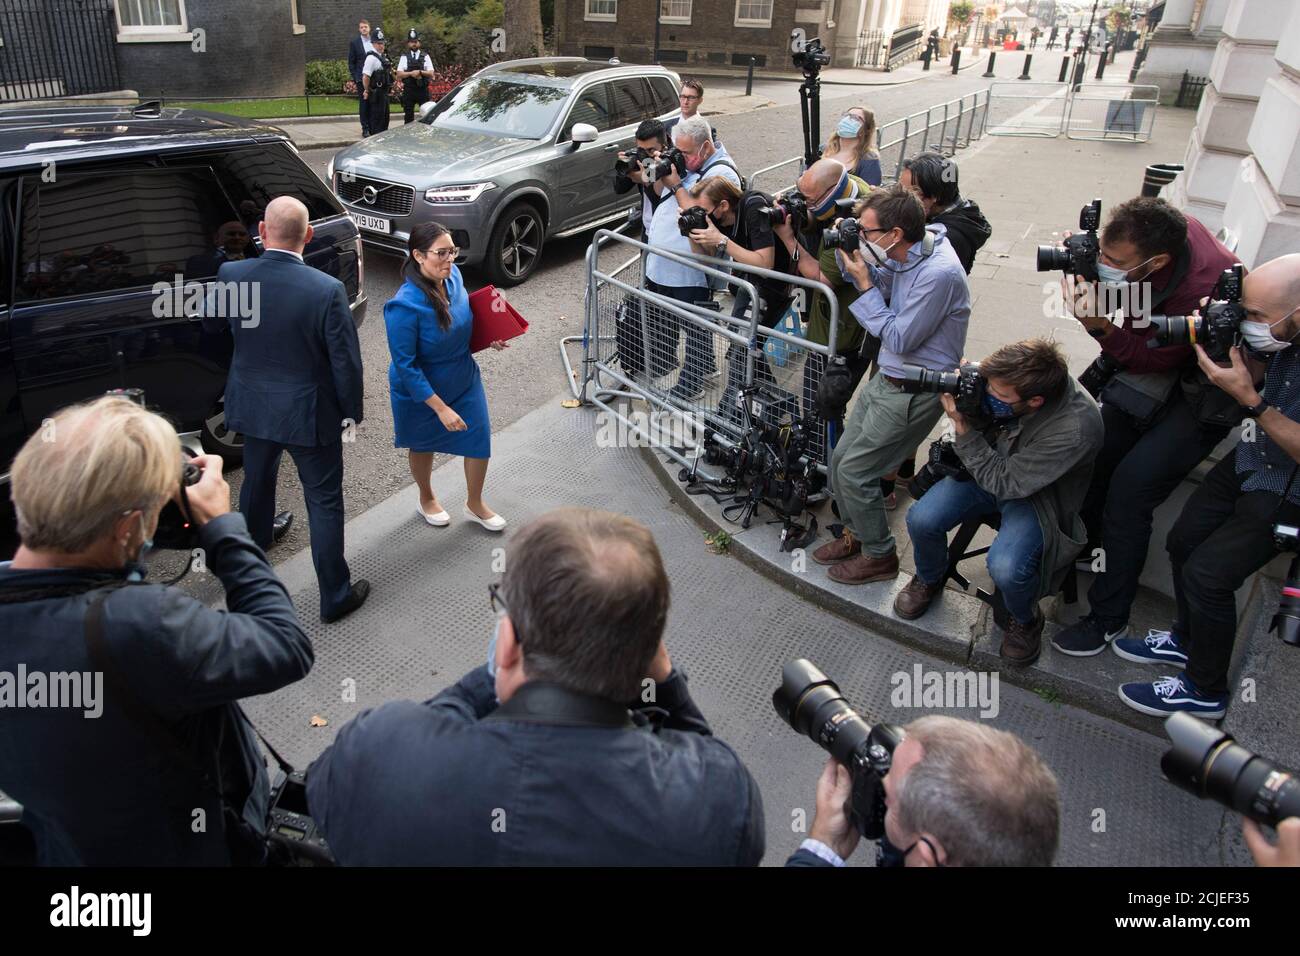 Home Secretary Priti Patel arrives in Downing Street, London, ahead of a Cabinet meeting at the Foreign and Commonwealth Office. Stock Photo